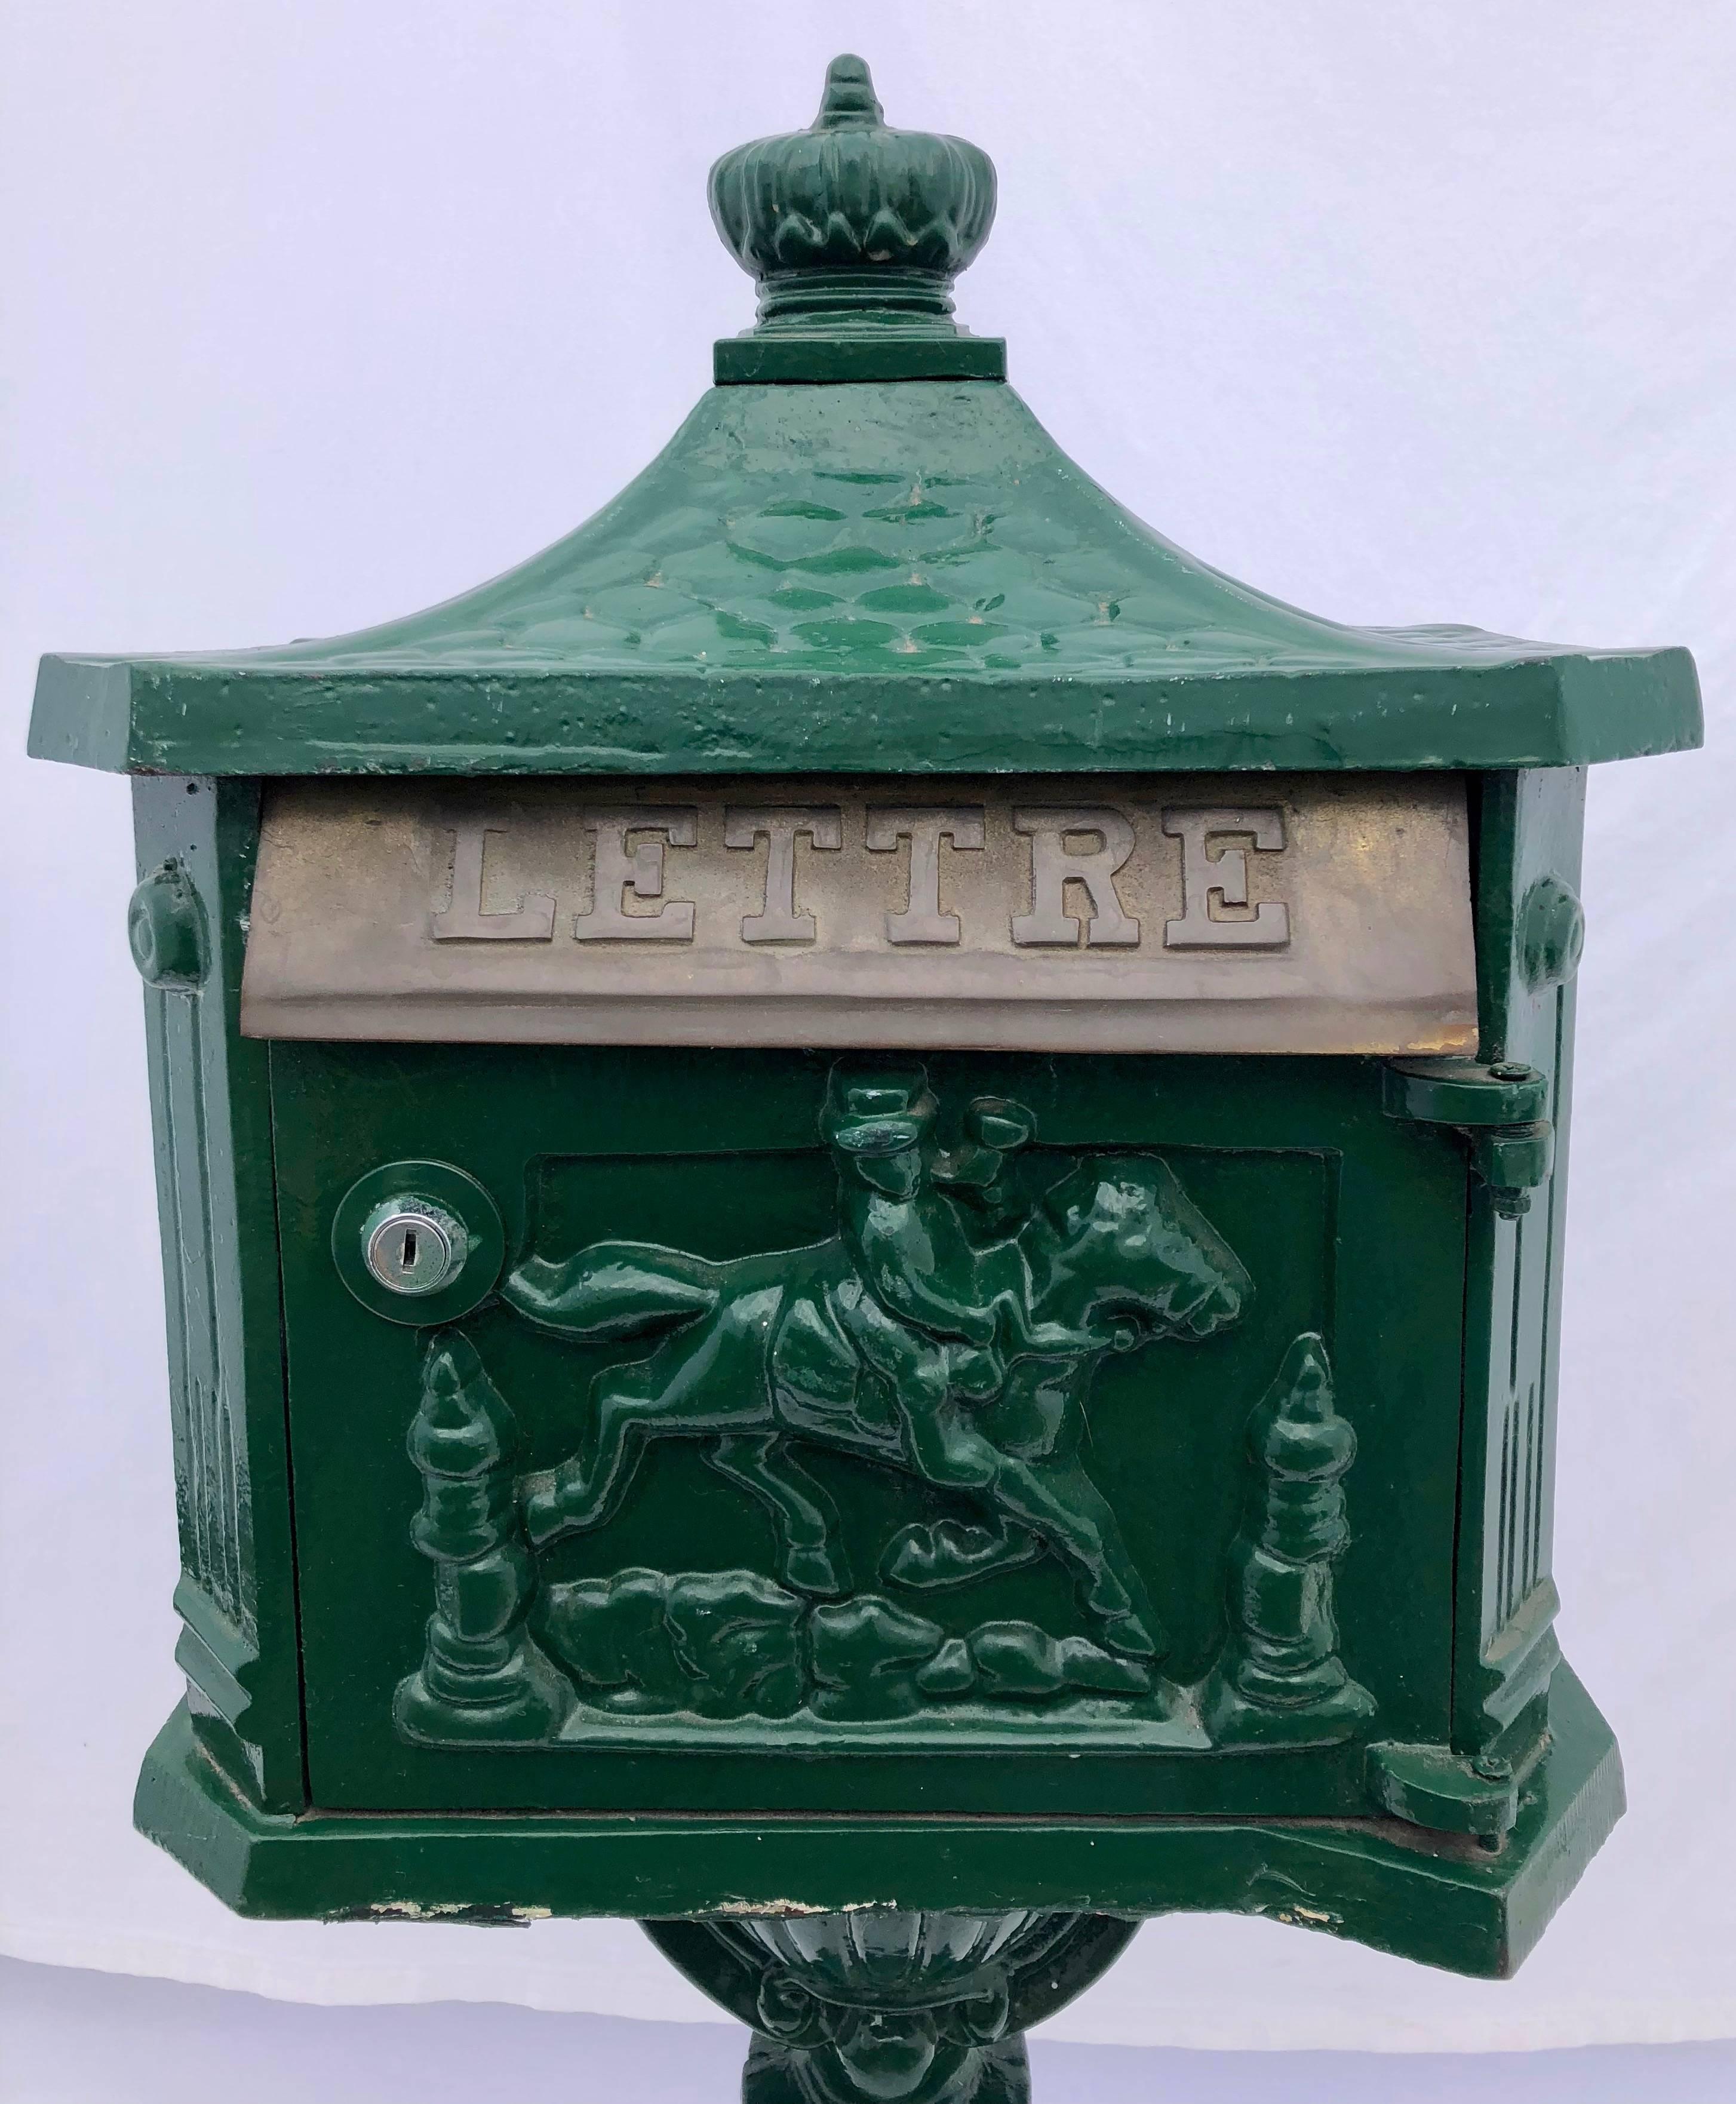 This is a beautiful French cast iron standing mailbox painted in green. In the front there is a mail slot for letters marked in French 